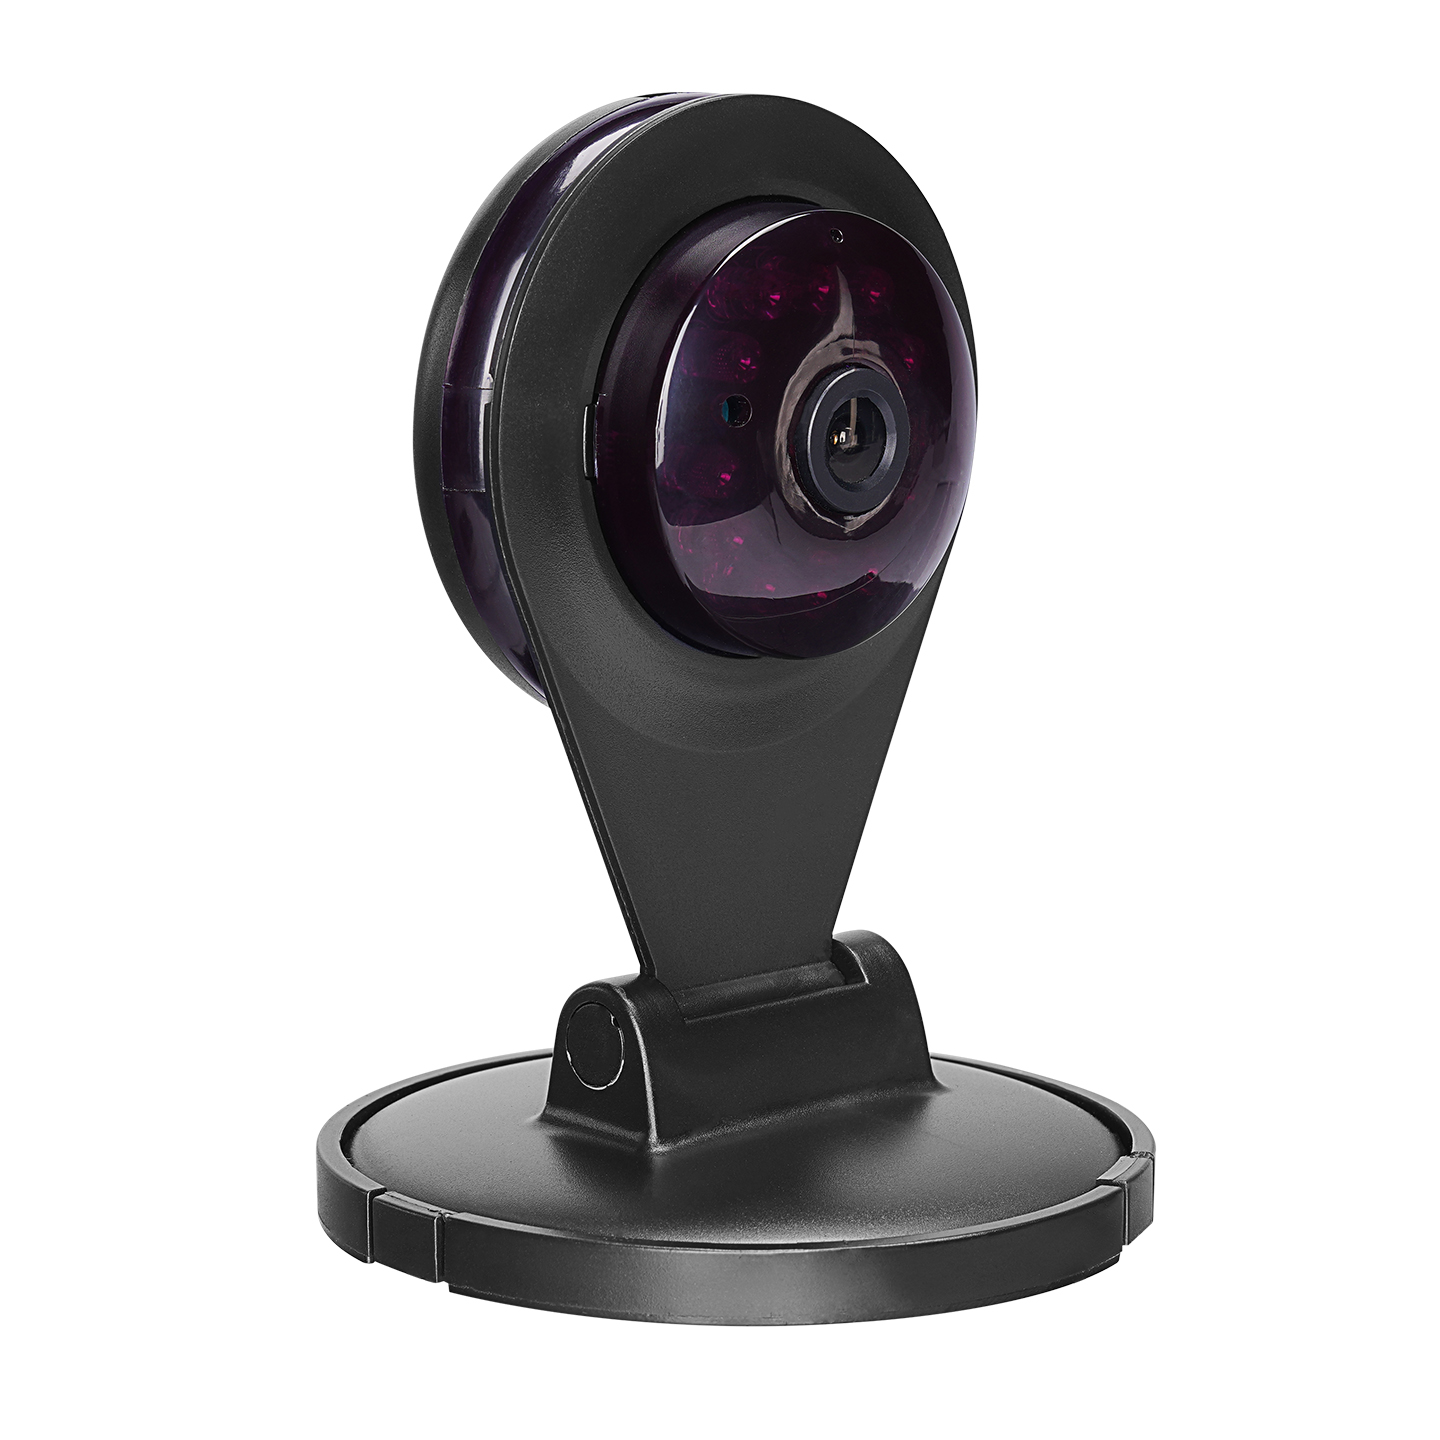 Everest SC-720 720P P2P Security Camera with Wi-Fi Support